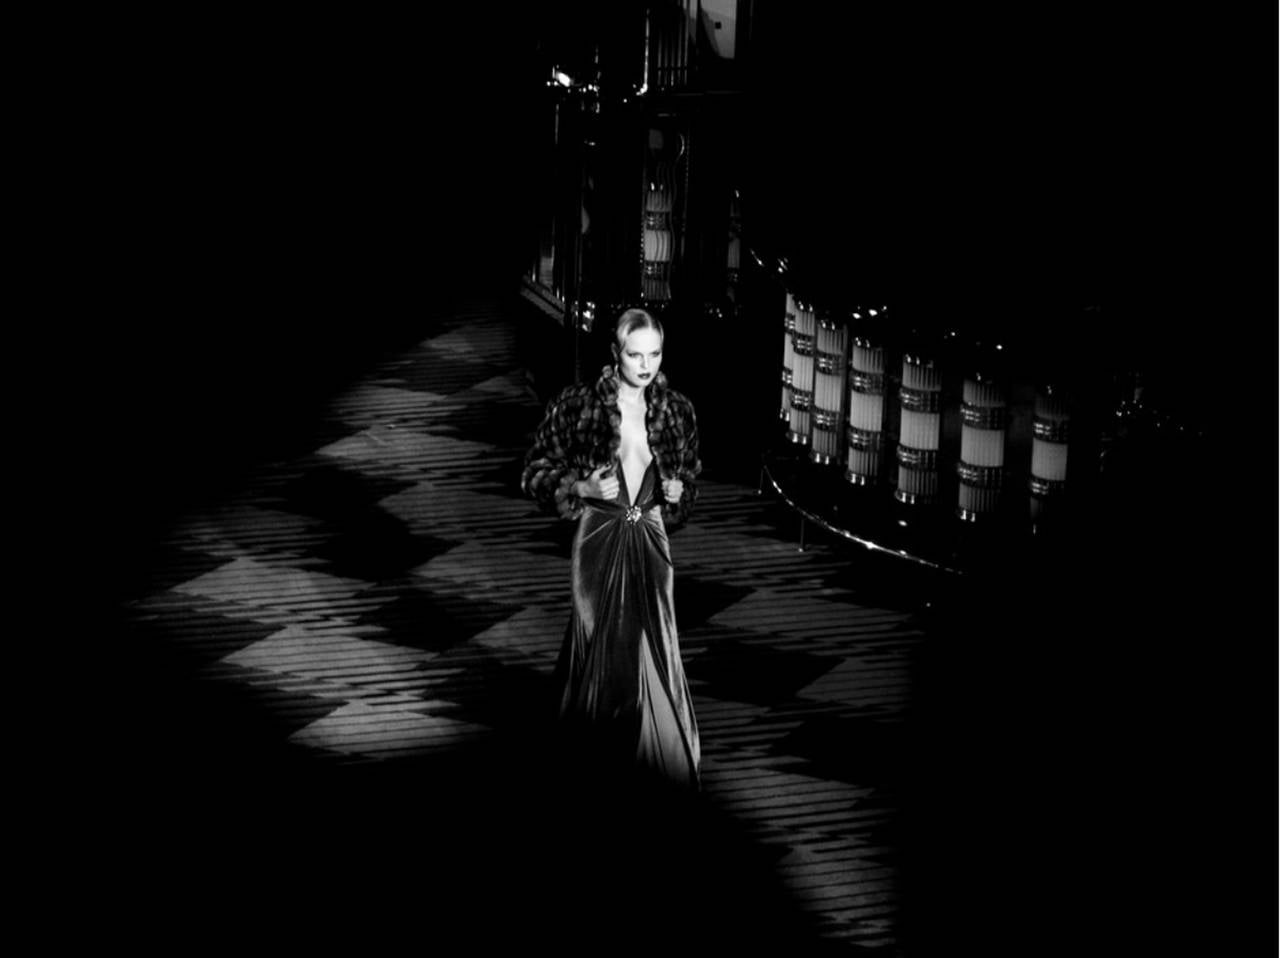 Paolo Pellegrin Black and White Photograph - Model in New York